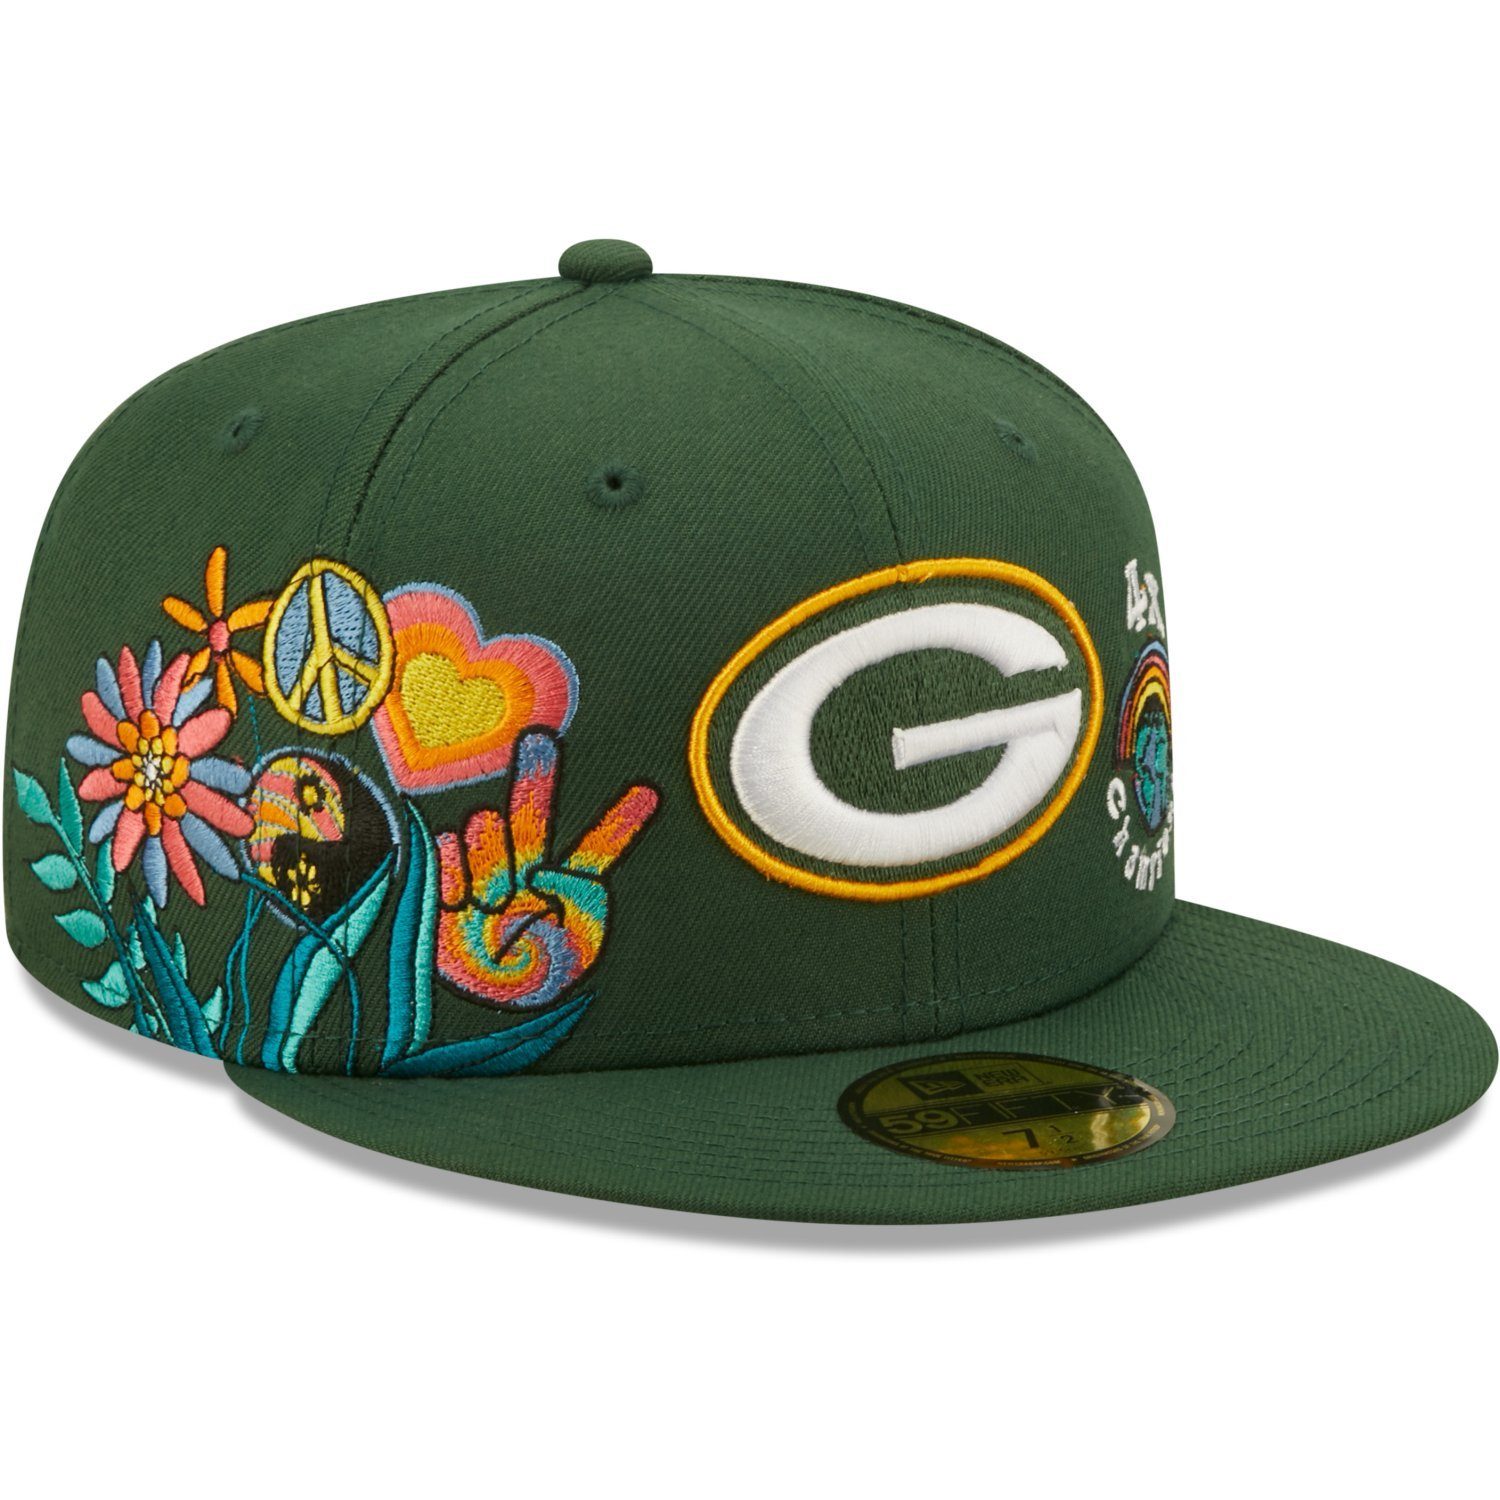 Era Bay Packers Cap 59Fifty Fitted GROOVY Green New